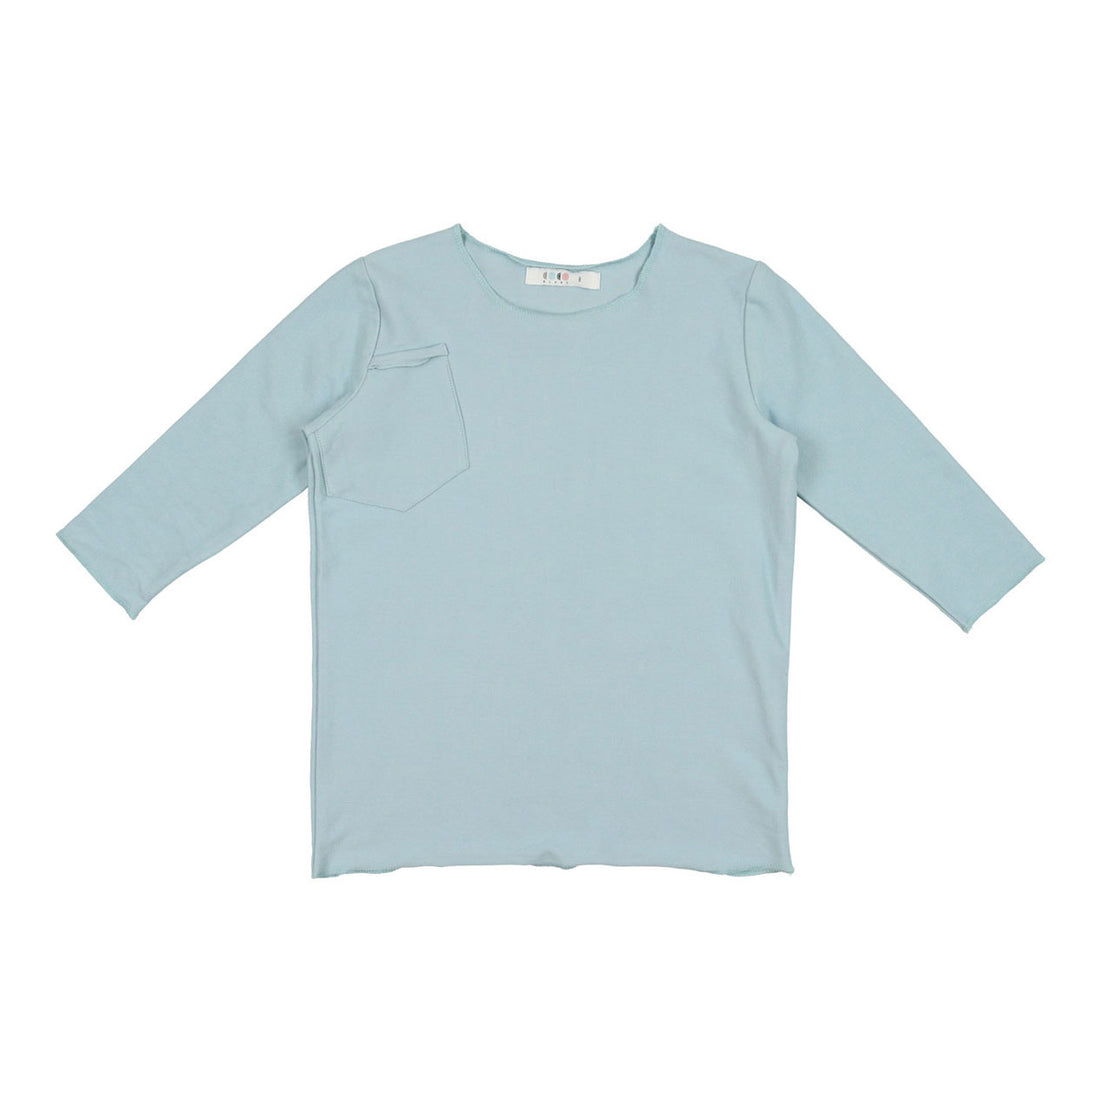 Coco Blanc Pale Blue French Terry 3/4 Tee